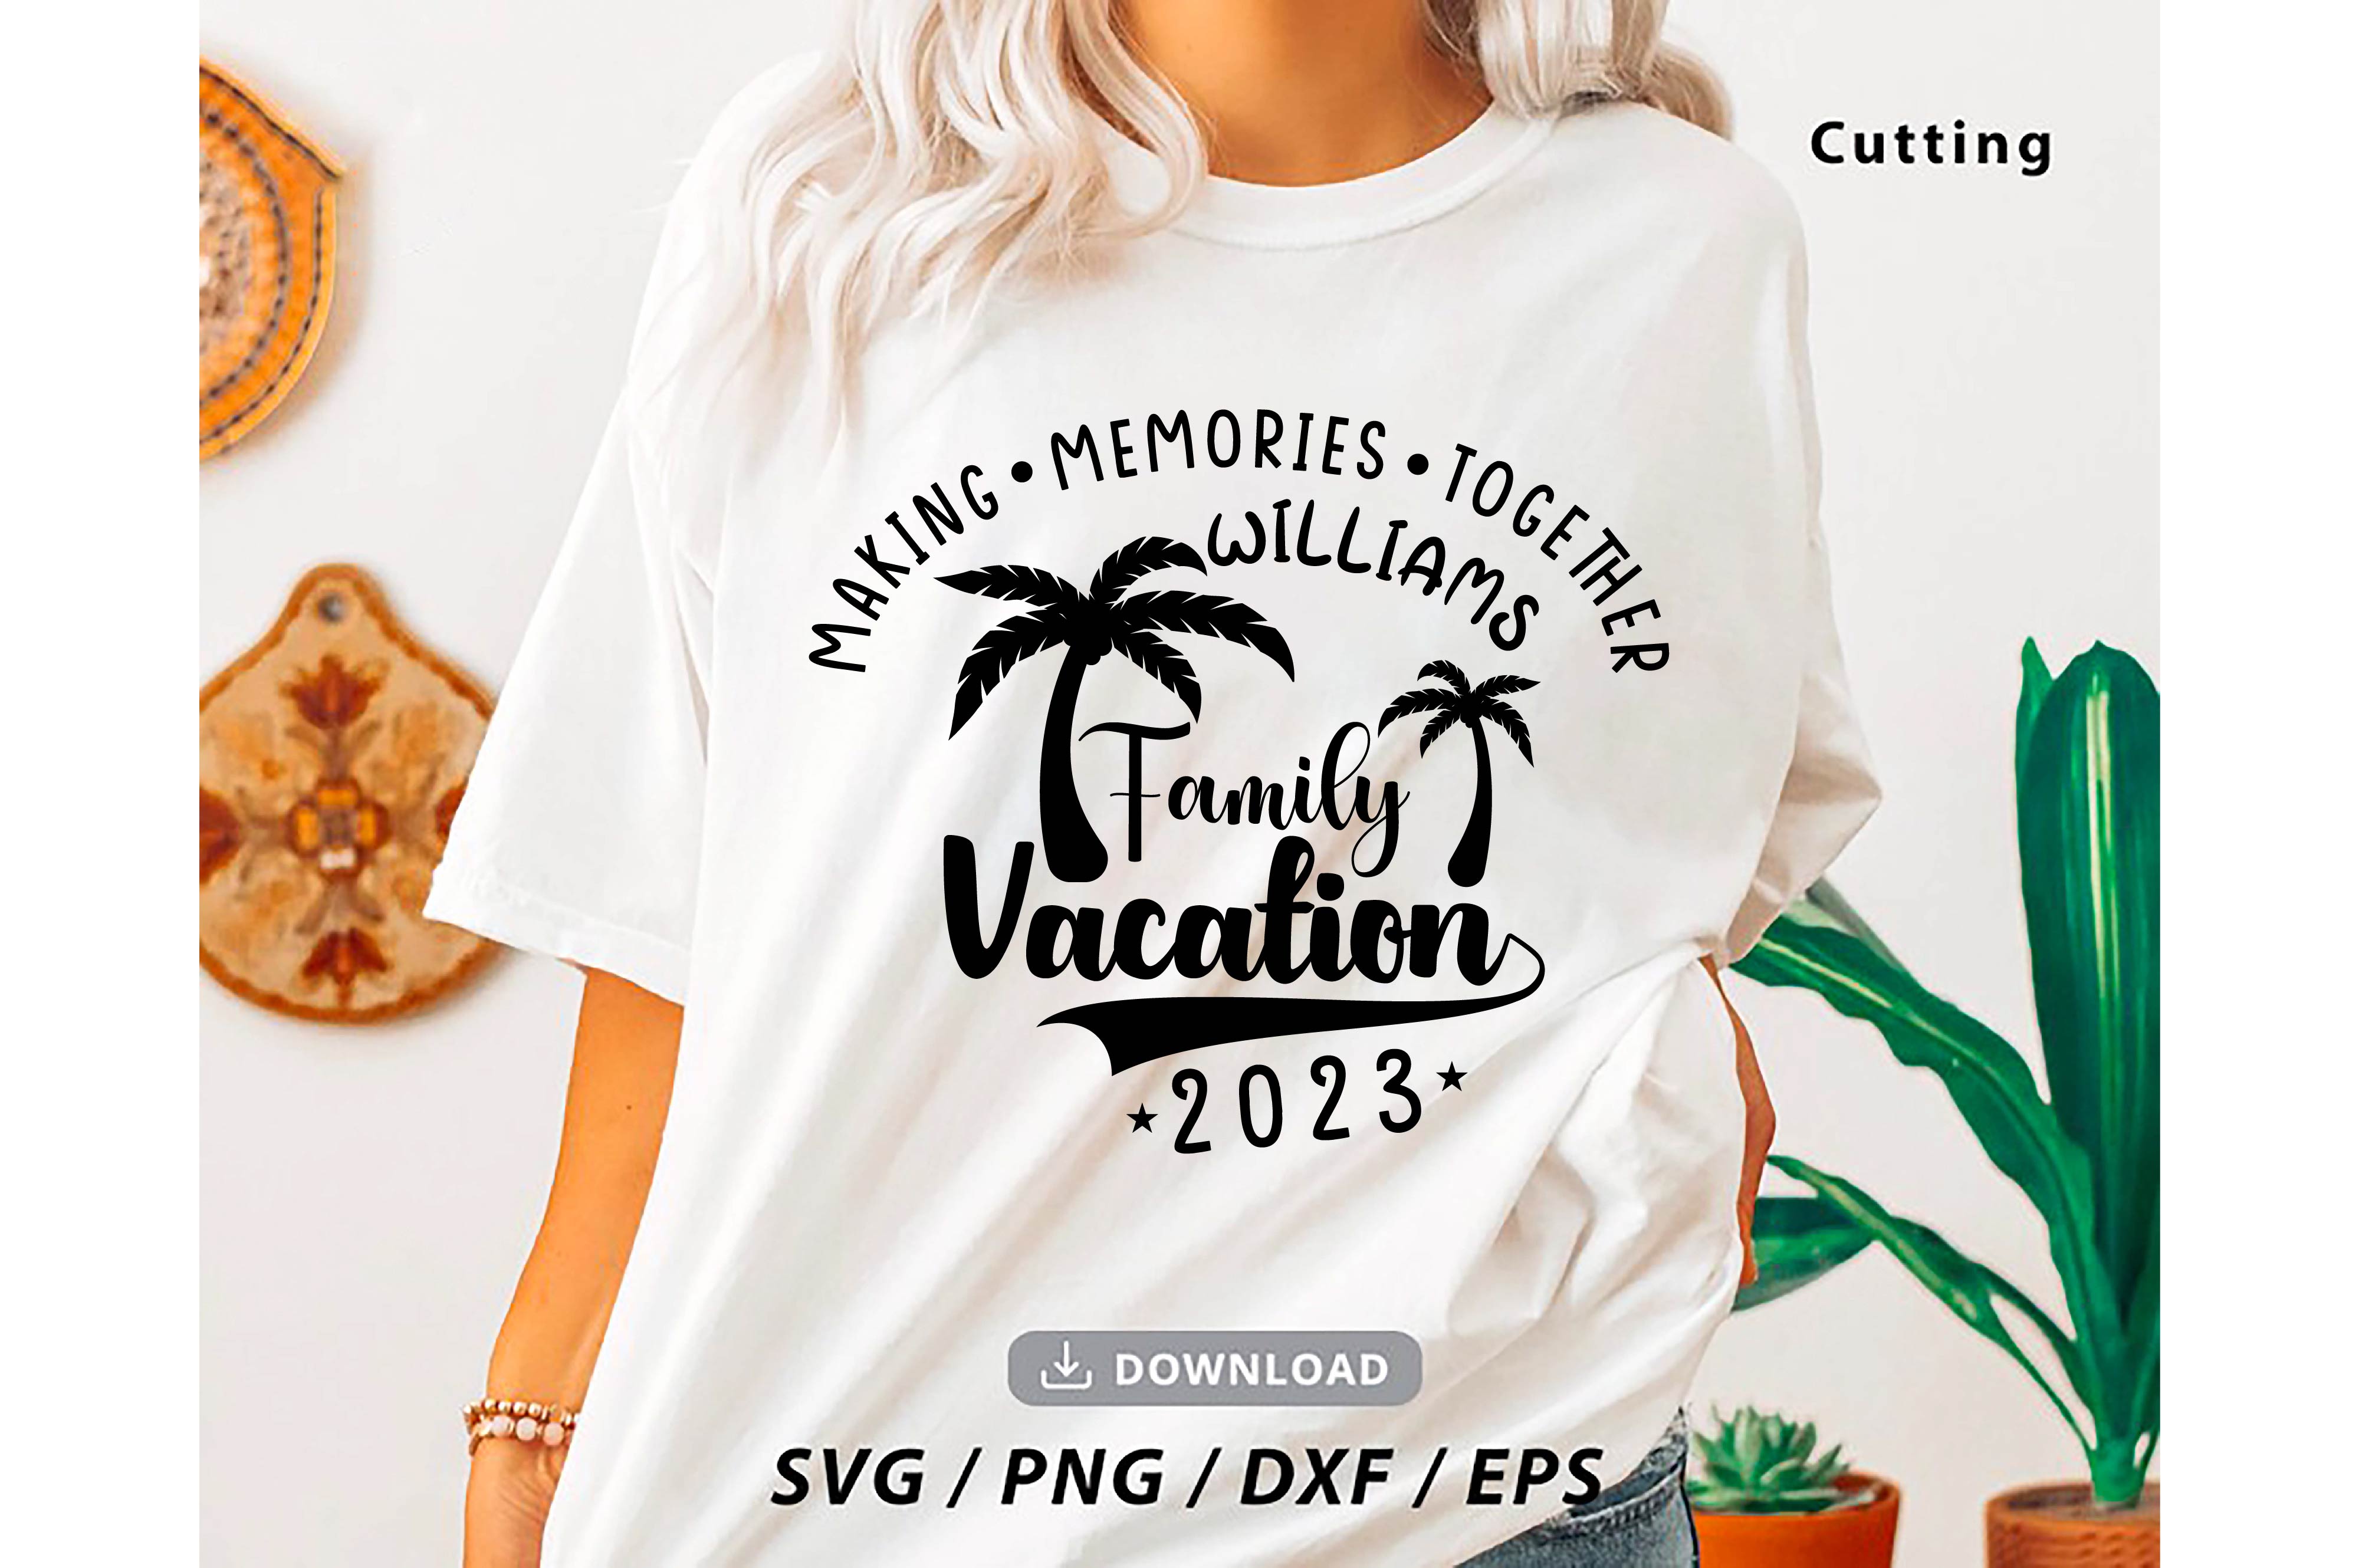 family vacation 2023 svg making memories together custom family vacation cut files summer 2023 vacations 03 387